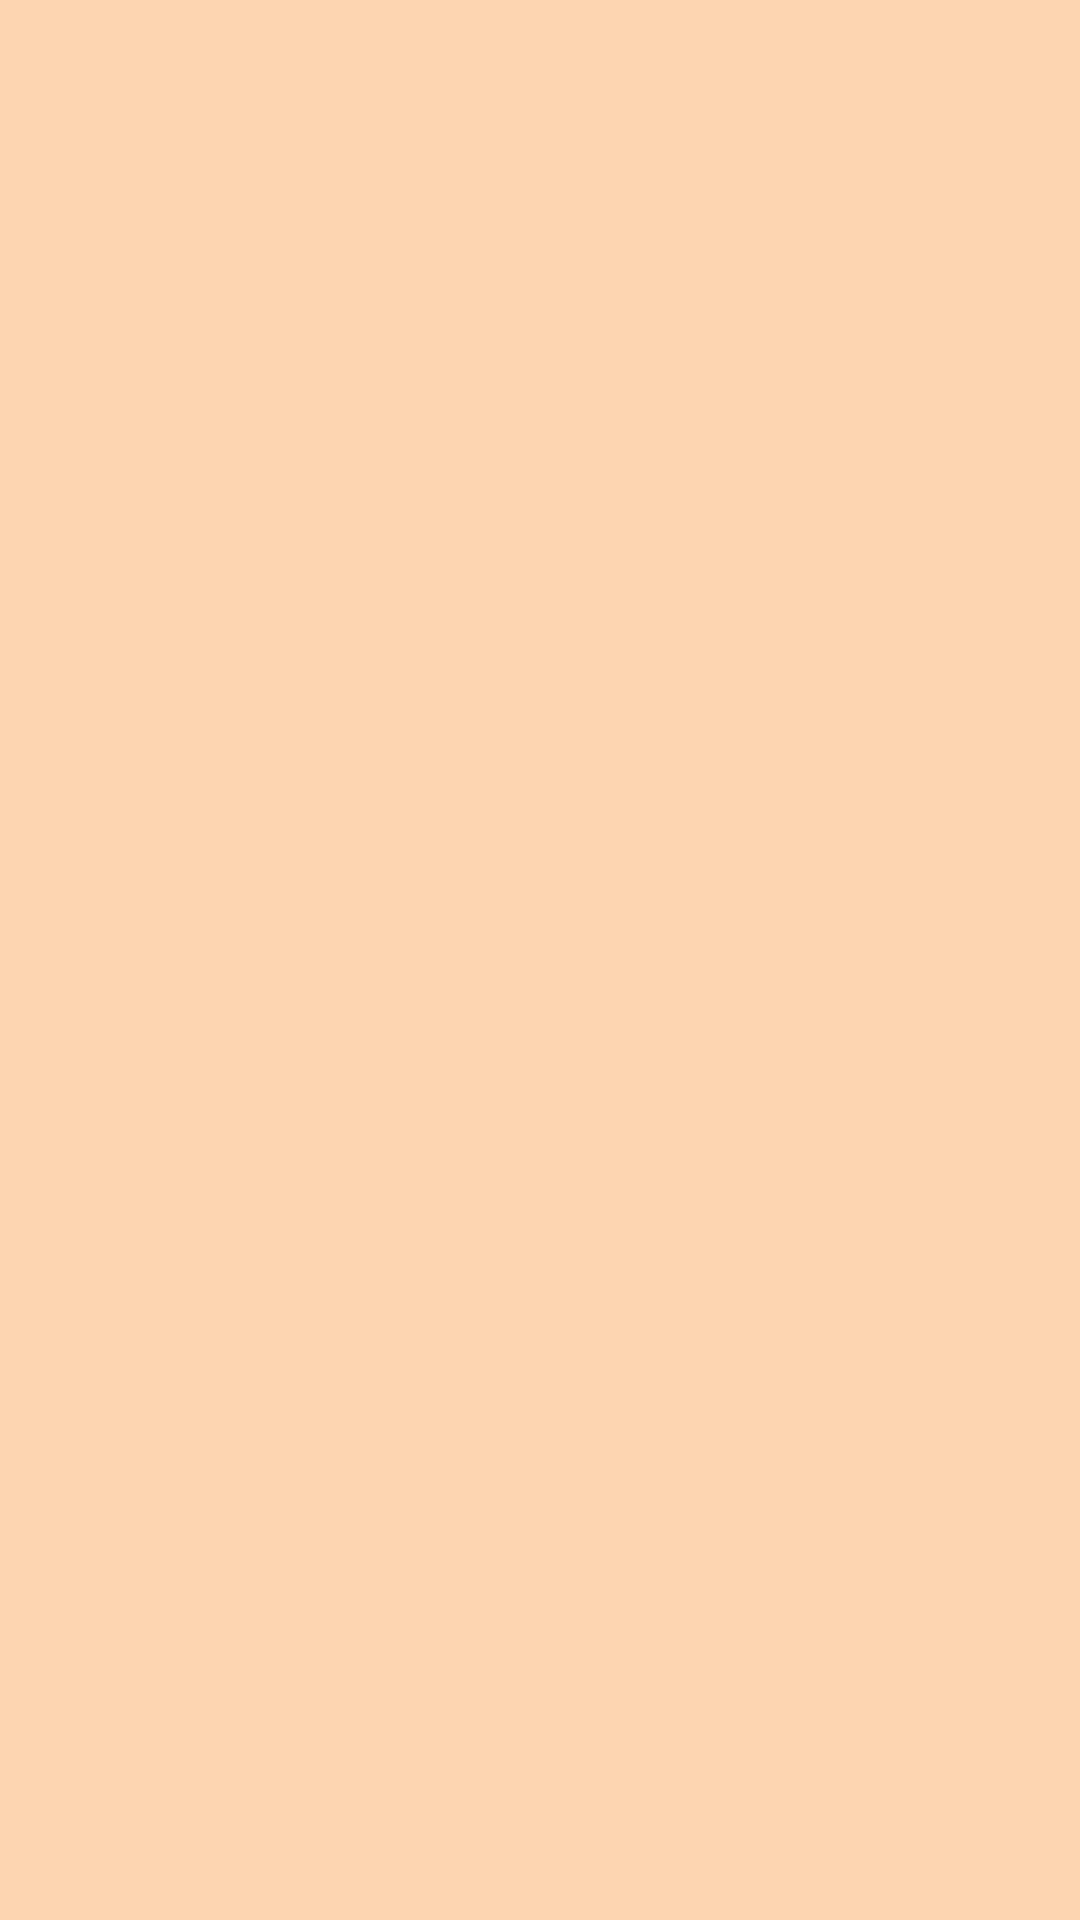 1080x1920 Light Apricot Solid Color Background